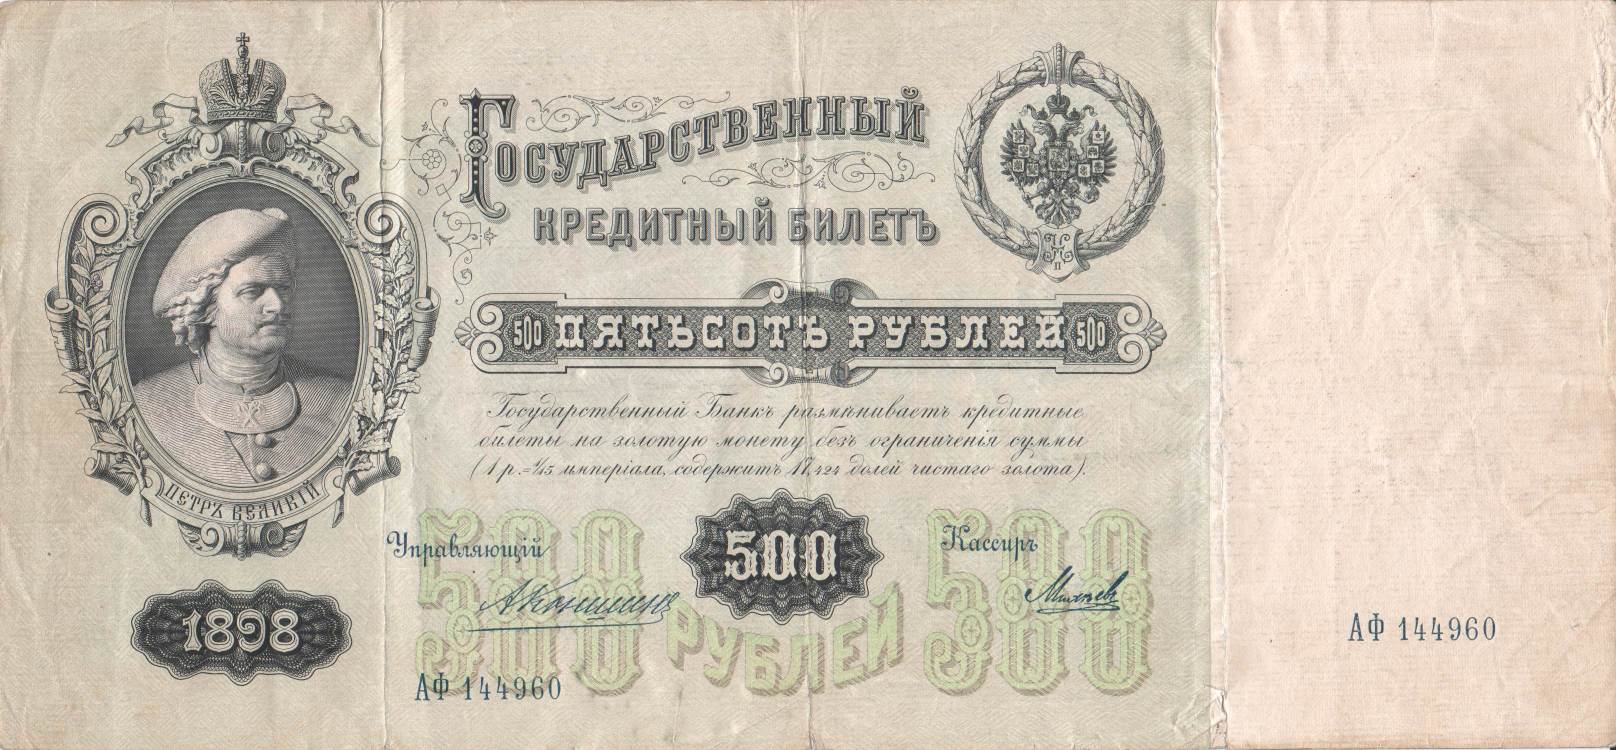 A rare 500-rouble banknote from 1898 with a portrait of Peter the Great (T-BAN-1-4)